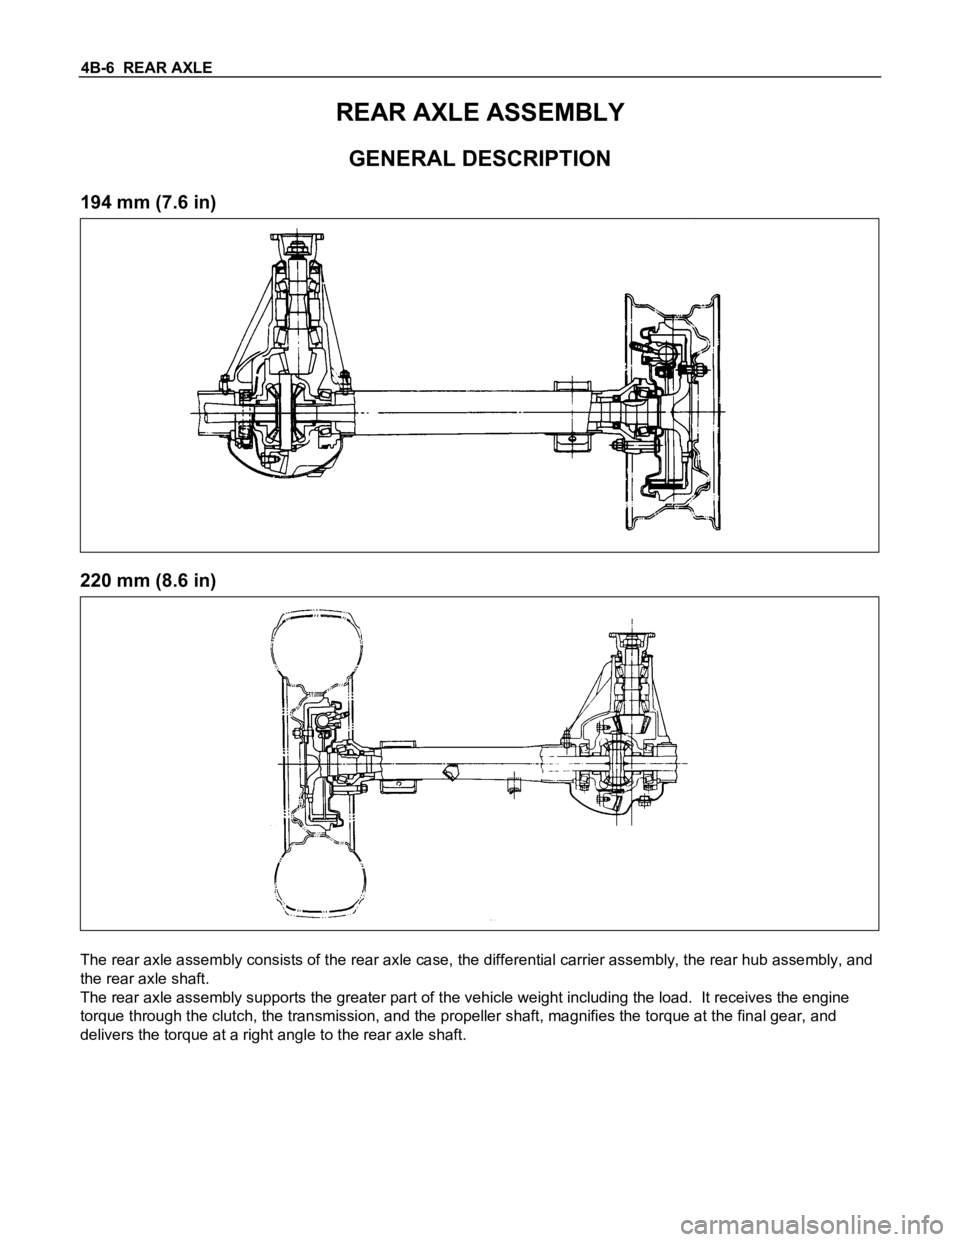 ISUZU TFS SERIES 1997  Workshop Manual 4B-6  REAR AXLE
REAR AXLE ASSEMBLY
GENERAL DESCRIPTION
194 mm (7.6 in)
220 mm (8.6 in)
The rear axle assembly consists of the rear axle case, the differential carrier assembly, the rear hub assembly, 